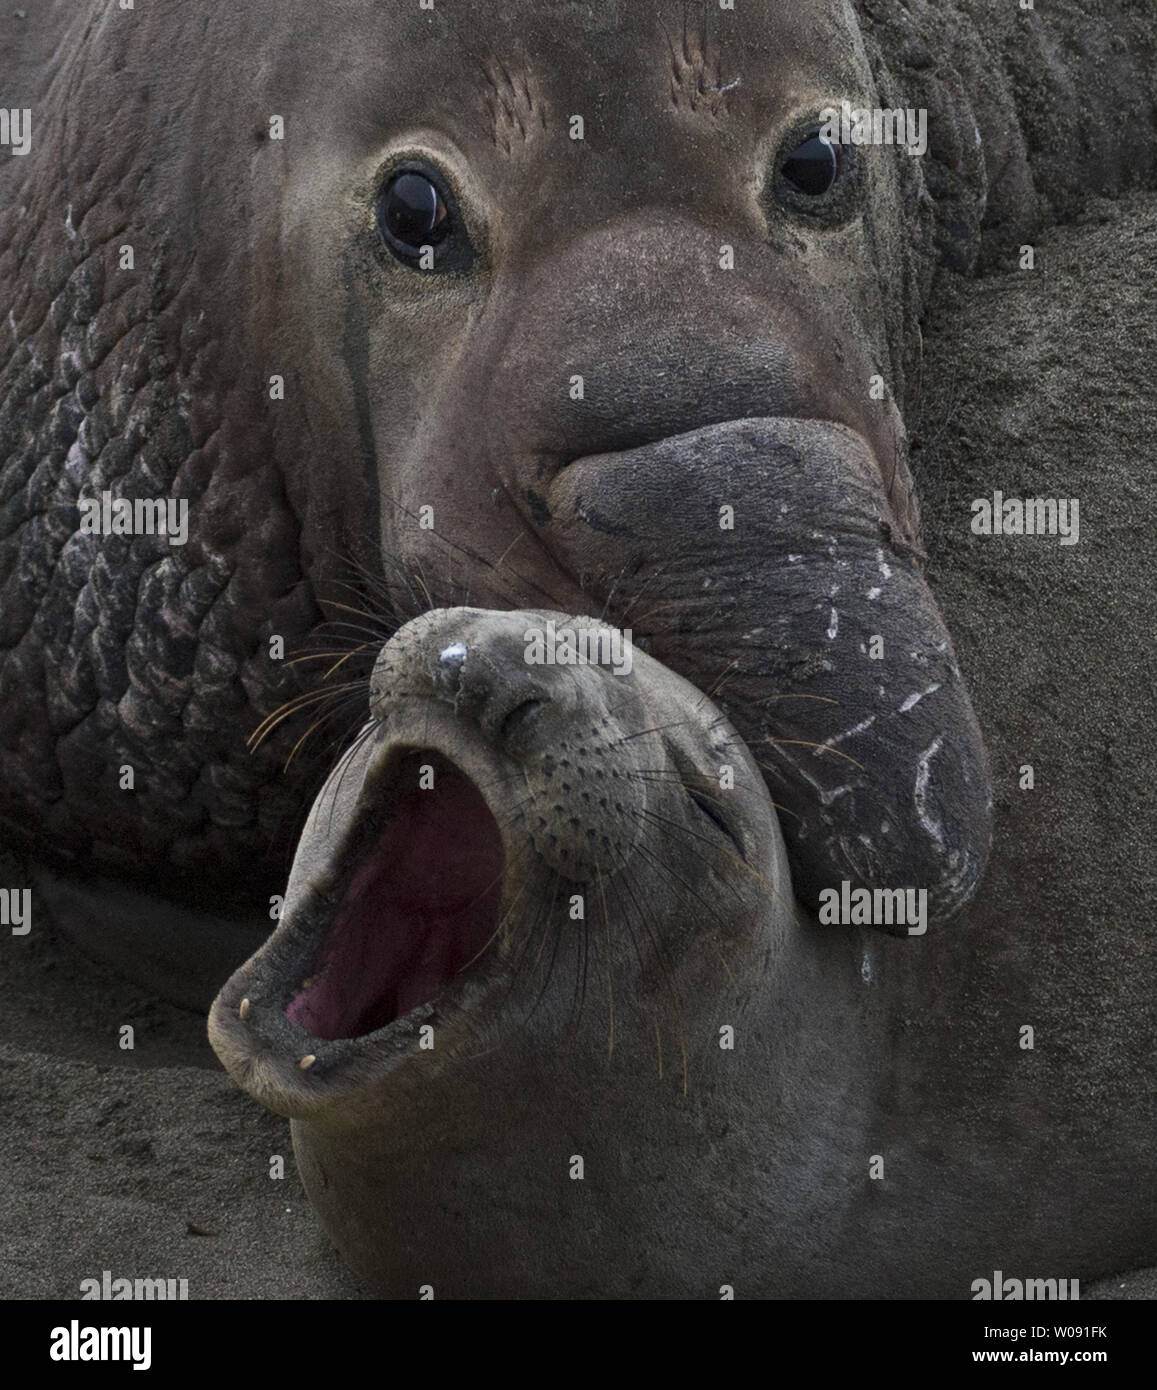 A female northern elephant seal yells as she is mounted by a dominant male on the beach in San Simeon, California on February 19, 2015. The males weigh up to 5,000 pounds and can have scores of females in their harem.   Photo by Terry Schmitt/UPI Stock Photo